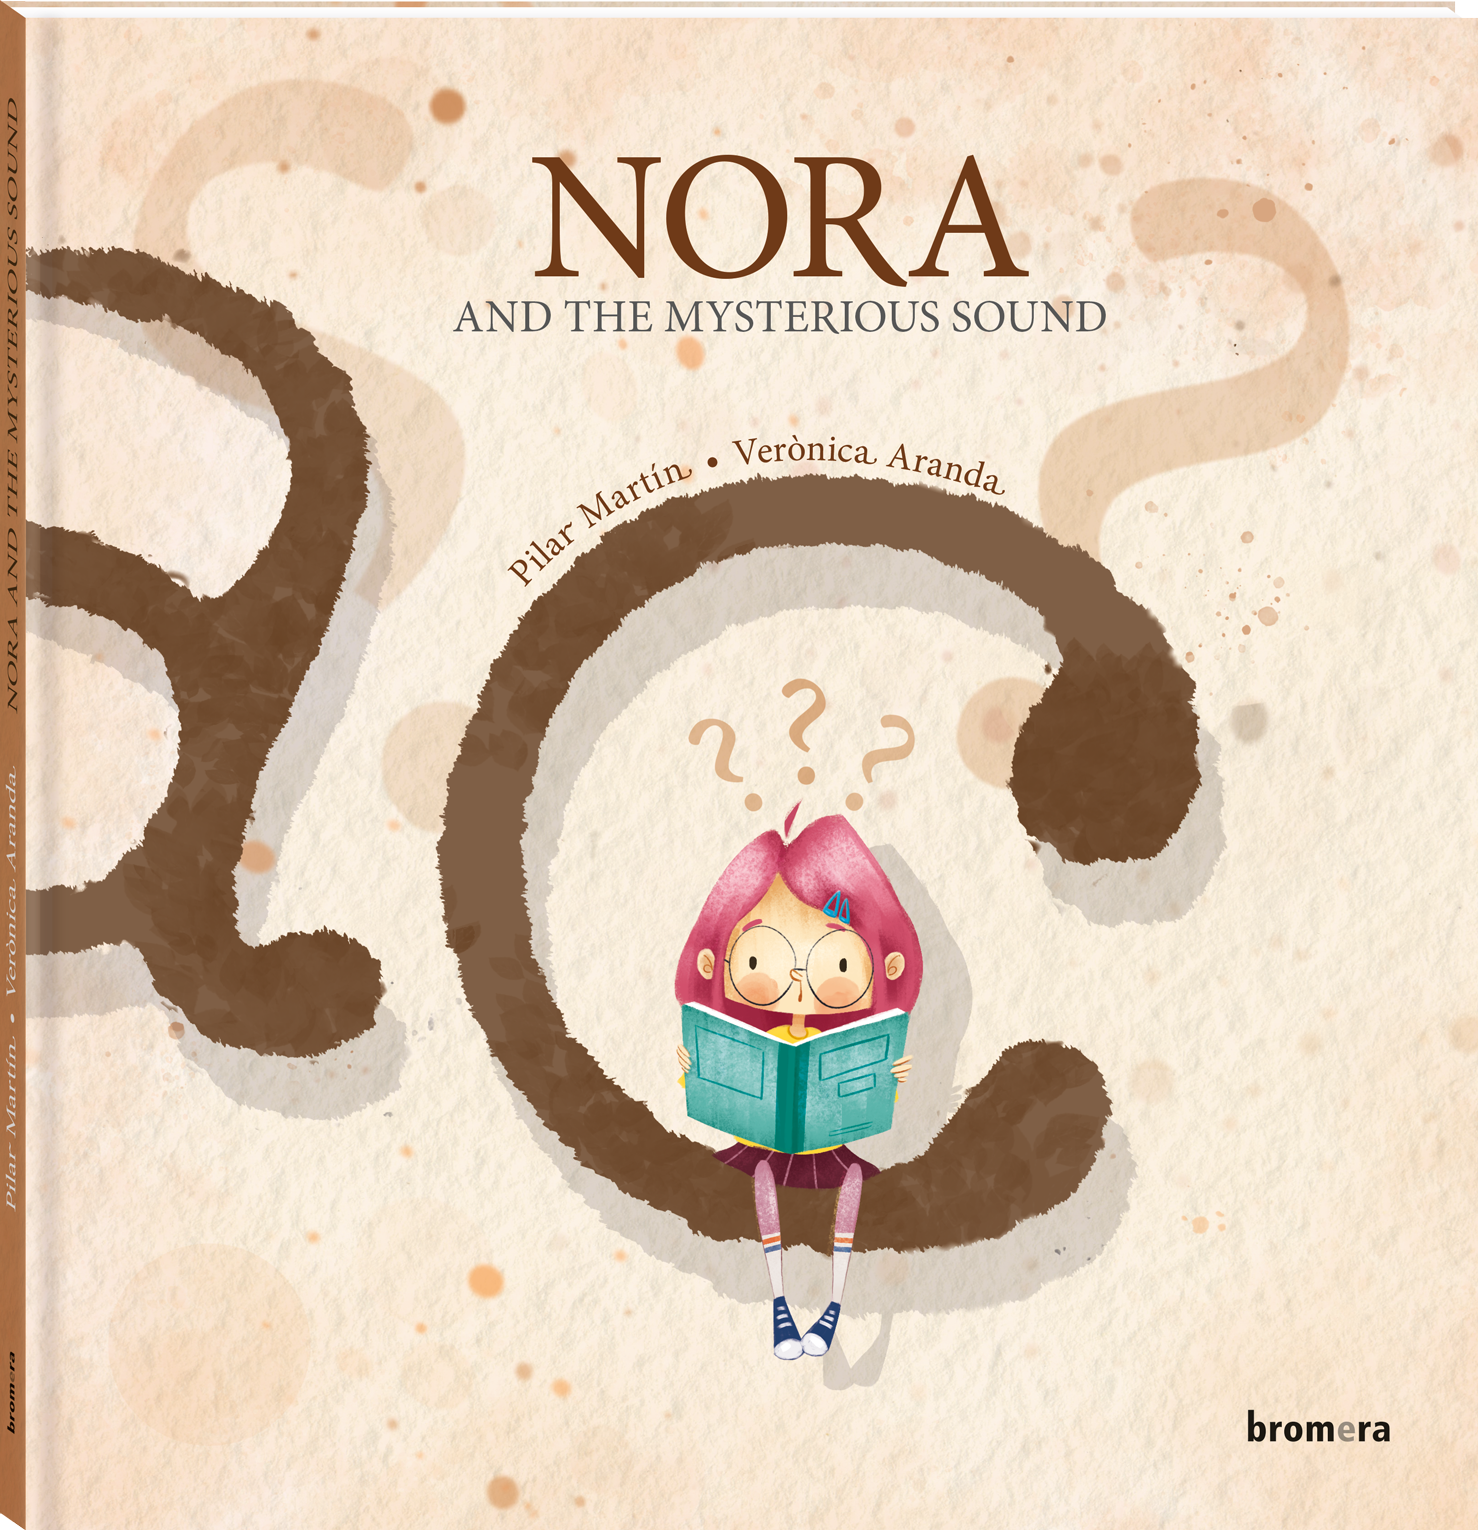 Nora and the Mysterious Sound